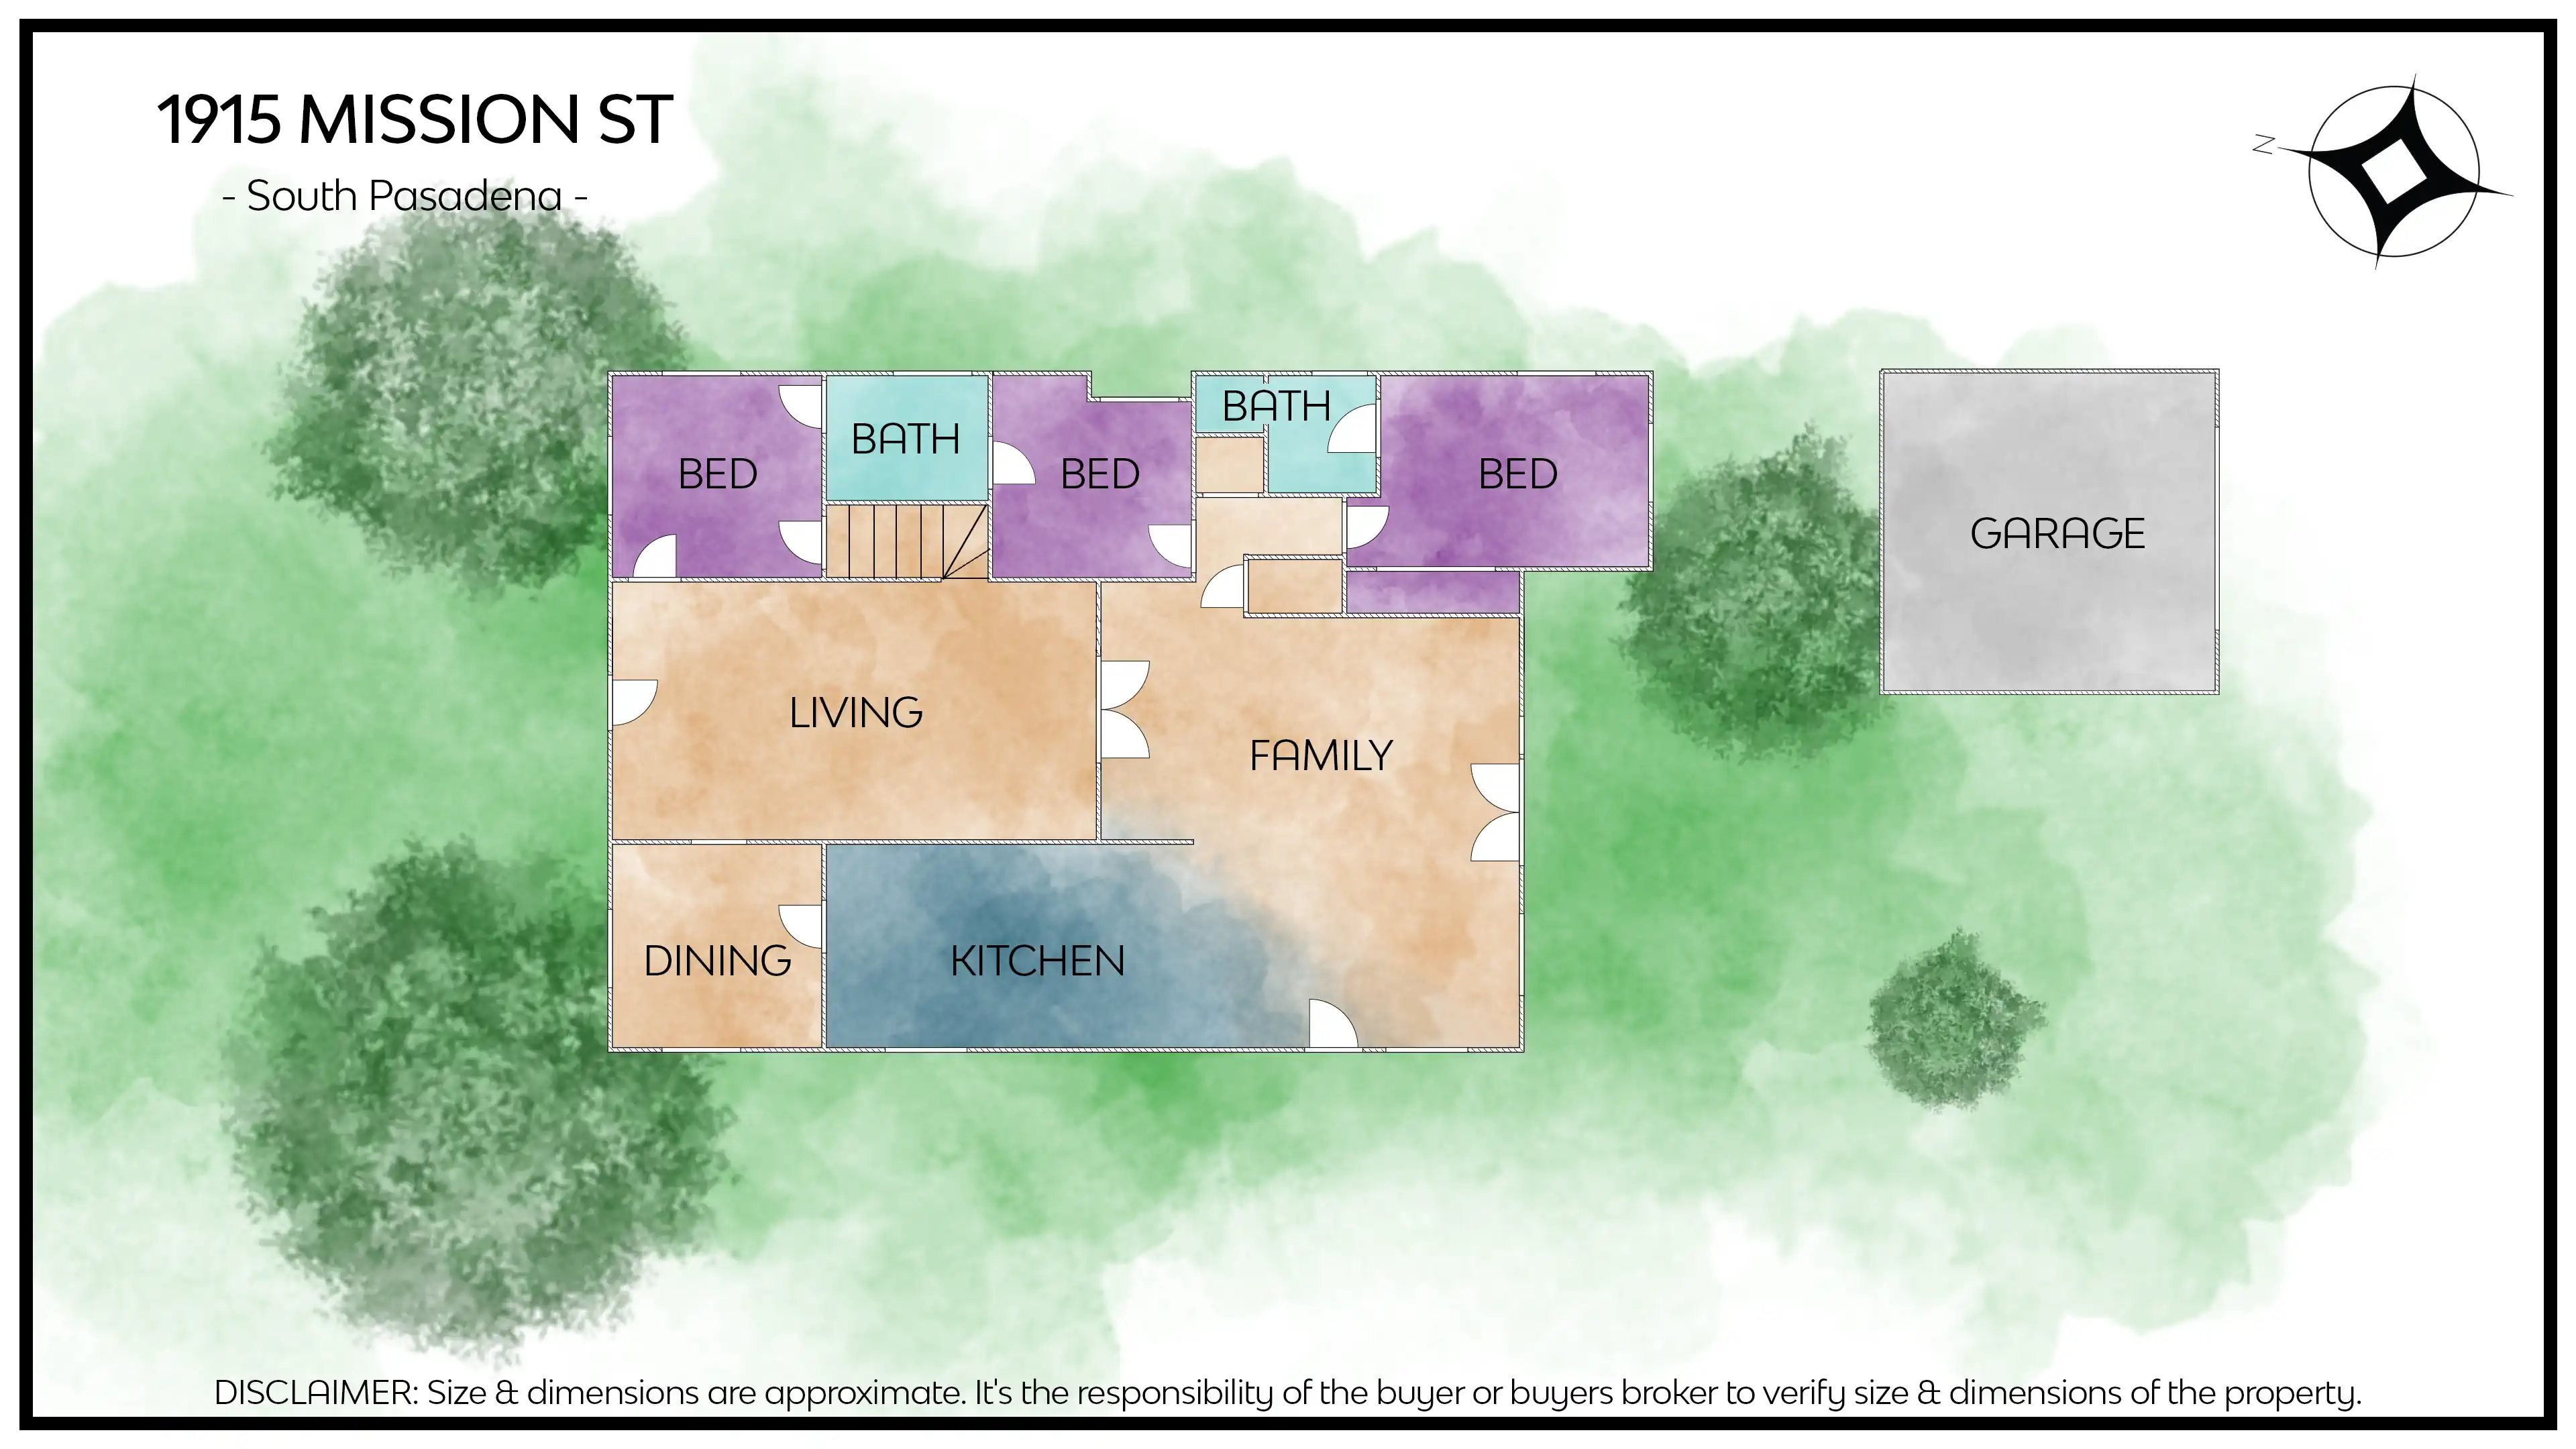 A watercolor floor plan for the property located at ADDRESS. This artistic representation of the property's floor plan provides a unique and visually appealing way to showcase the layout and features of the home. The use of watercolor creates a warm and inviting feel that can help potential buyers envision themselves in the space. This image illustrates the value of using creative and eye-catching marketing materials to promote real estate listings